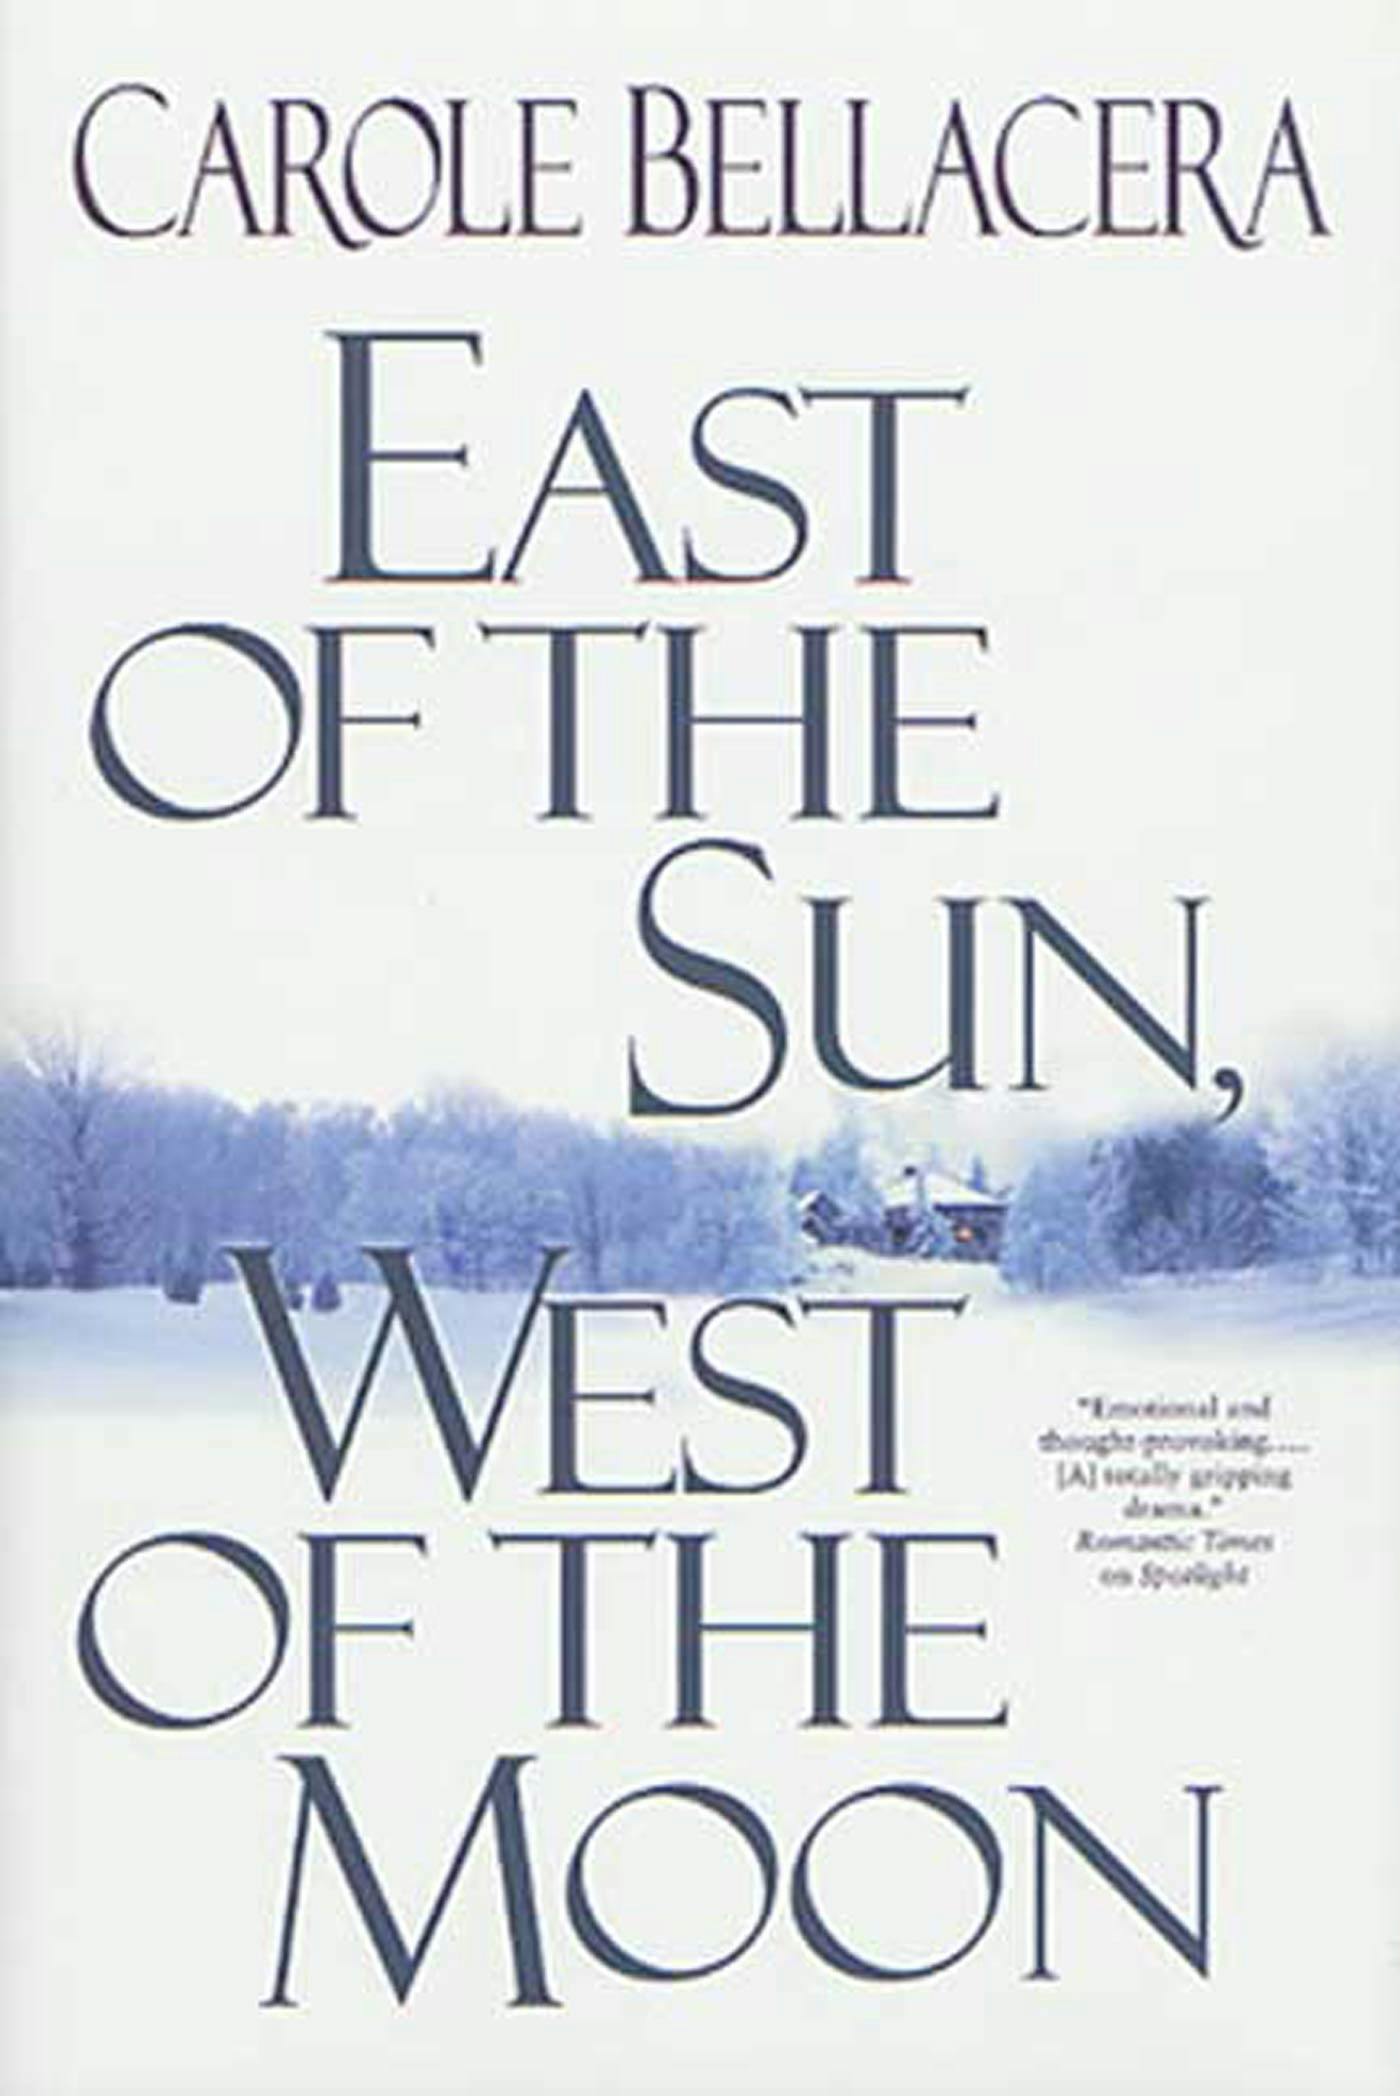 Cover for the book titled as: East of the Sun, West of the Moon